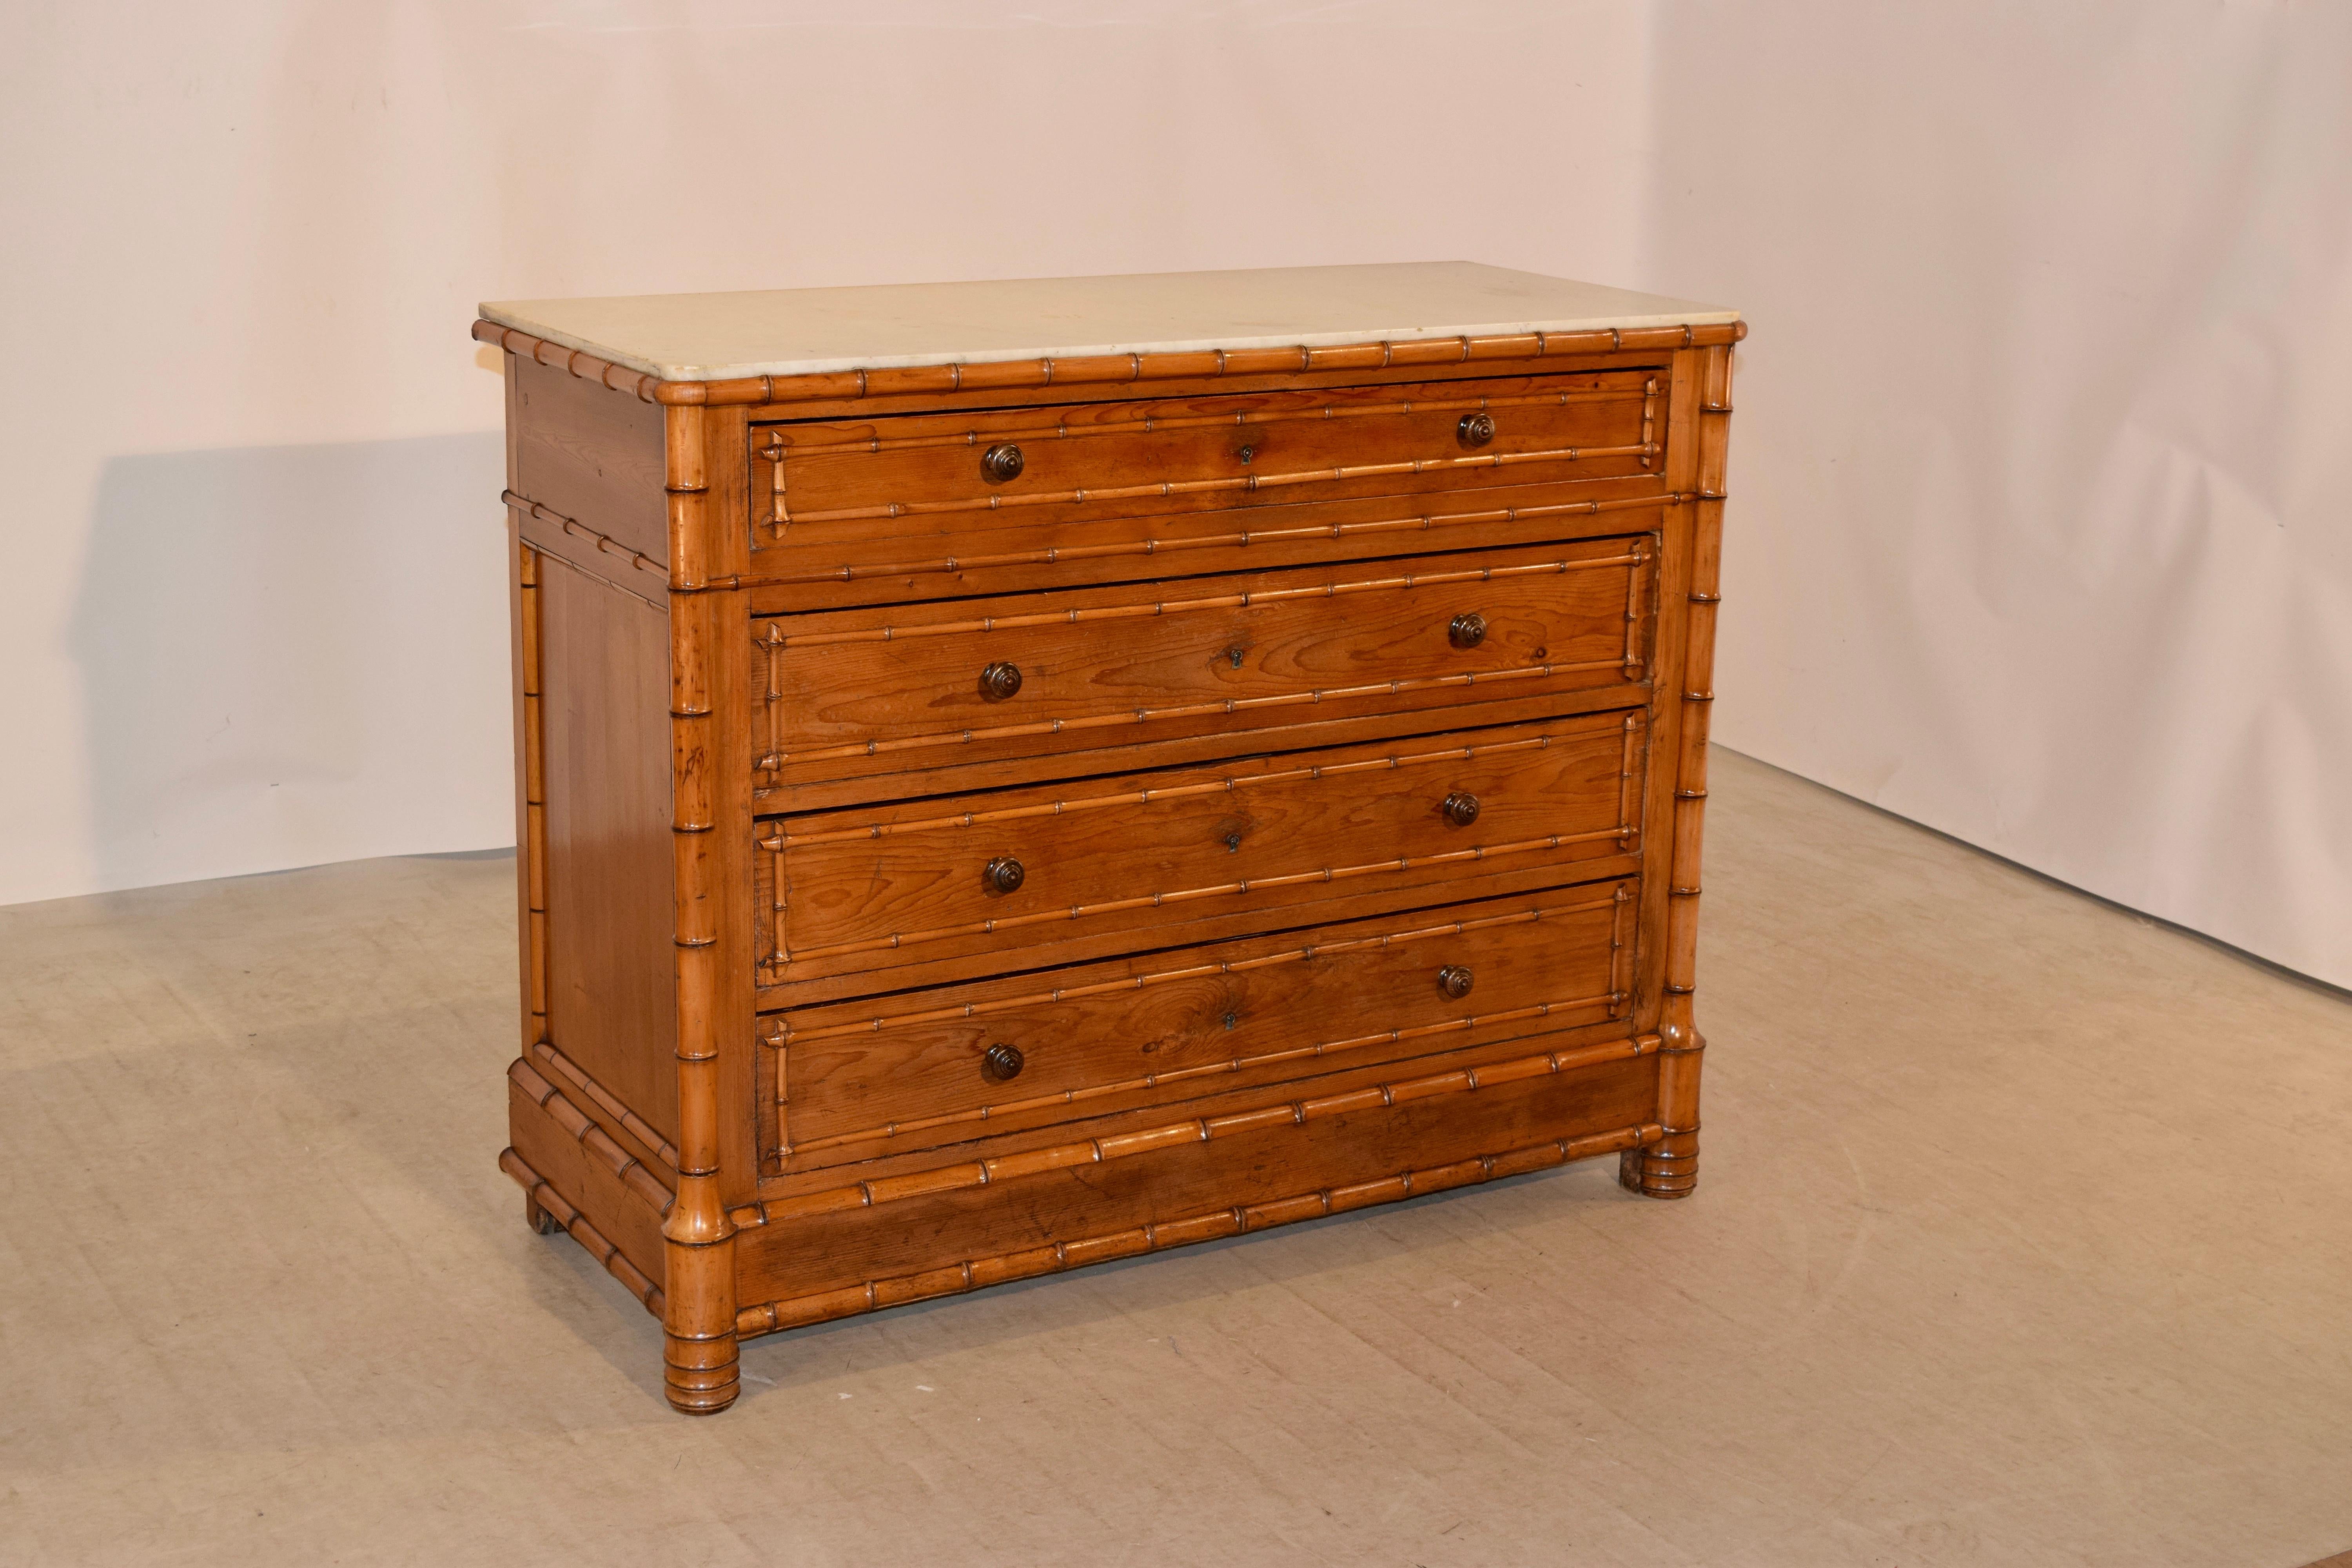 19th century French faux bamboo chest of drawers made from cherry. The top retains the original marble, banded by faux bamboo molded decoration, following down to hand paneled sides and four drawers in the front of the case, all with hand-turned